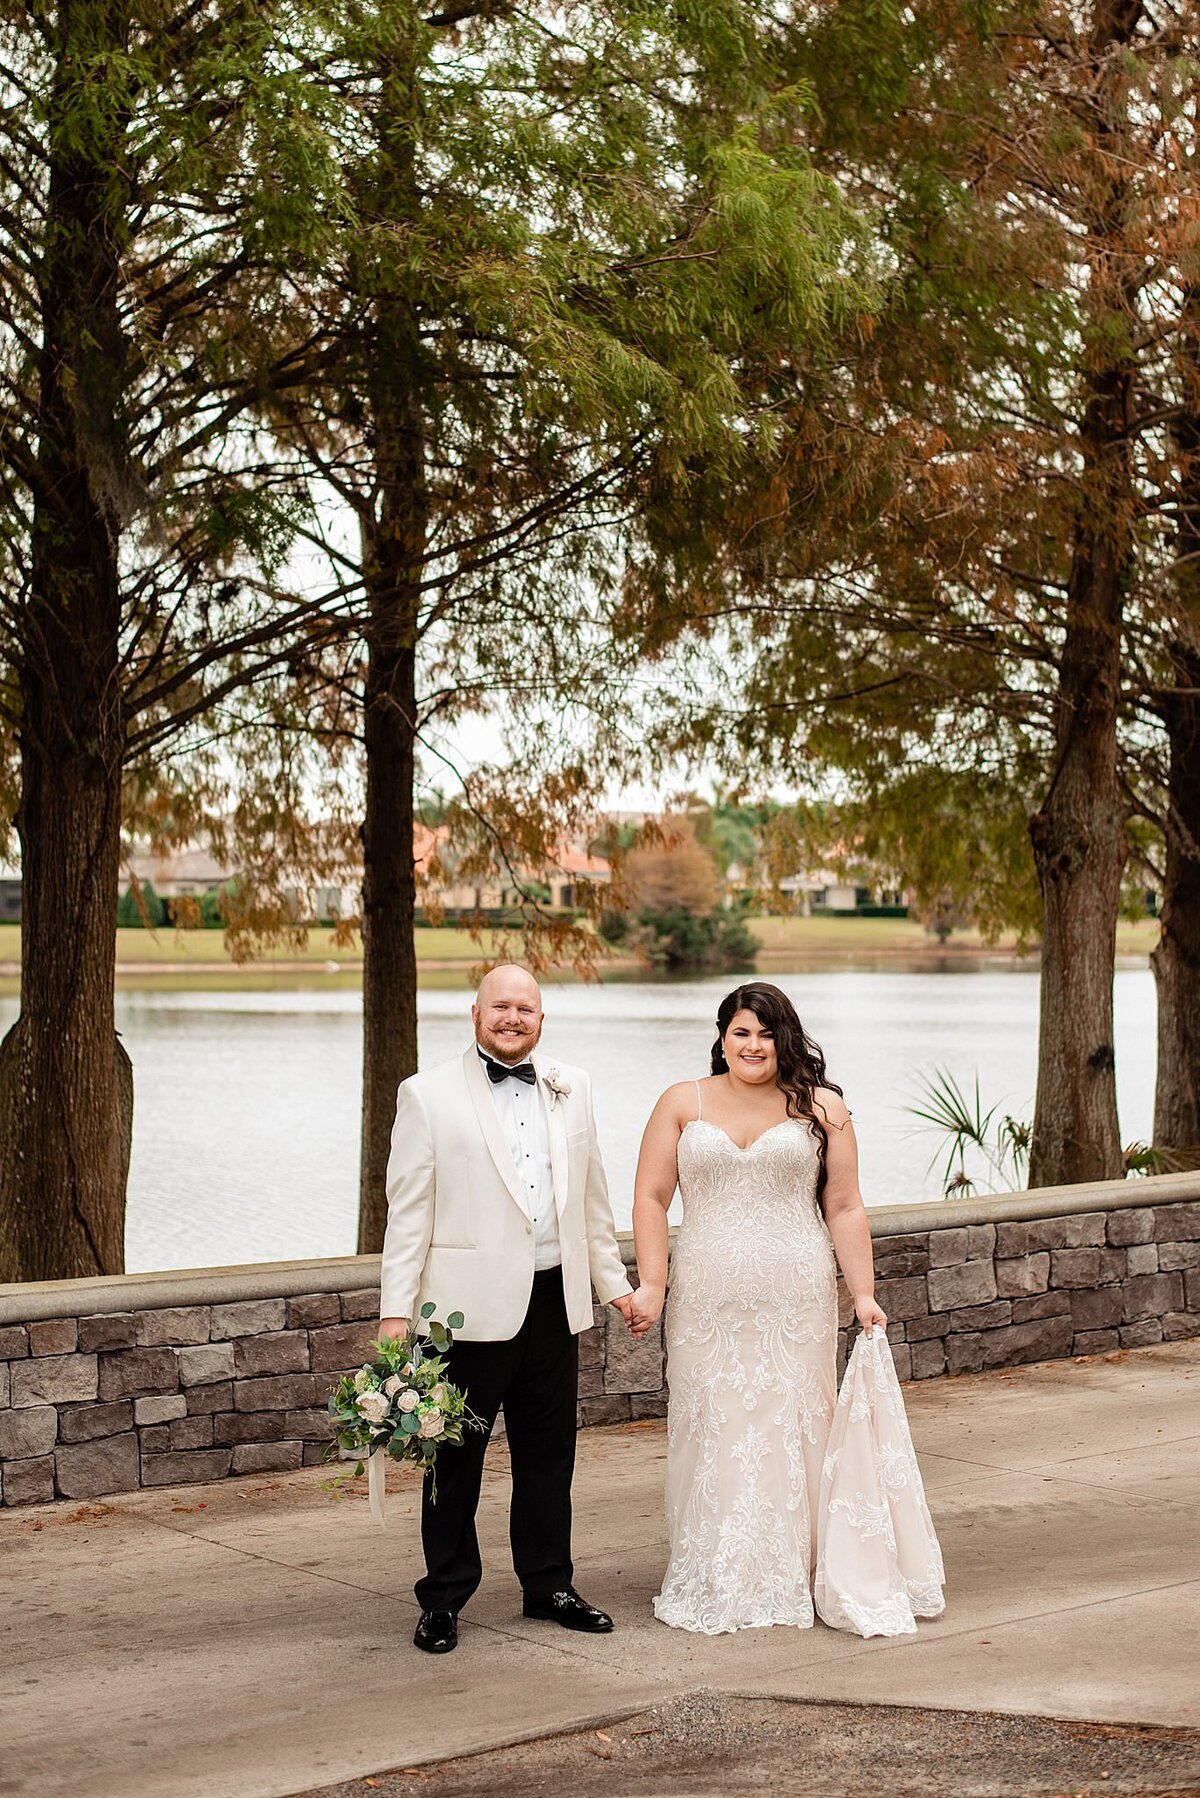 Bride and groom holding hands smiling at the camera outside with palm trees behind them